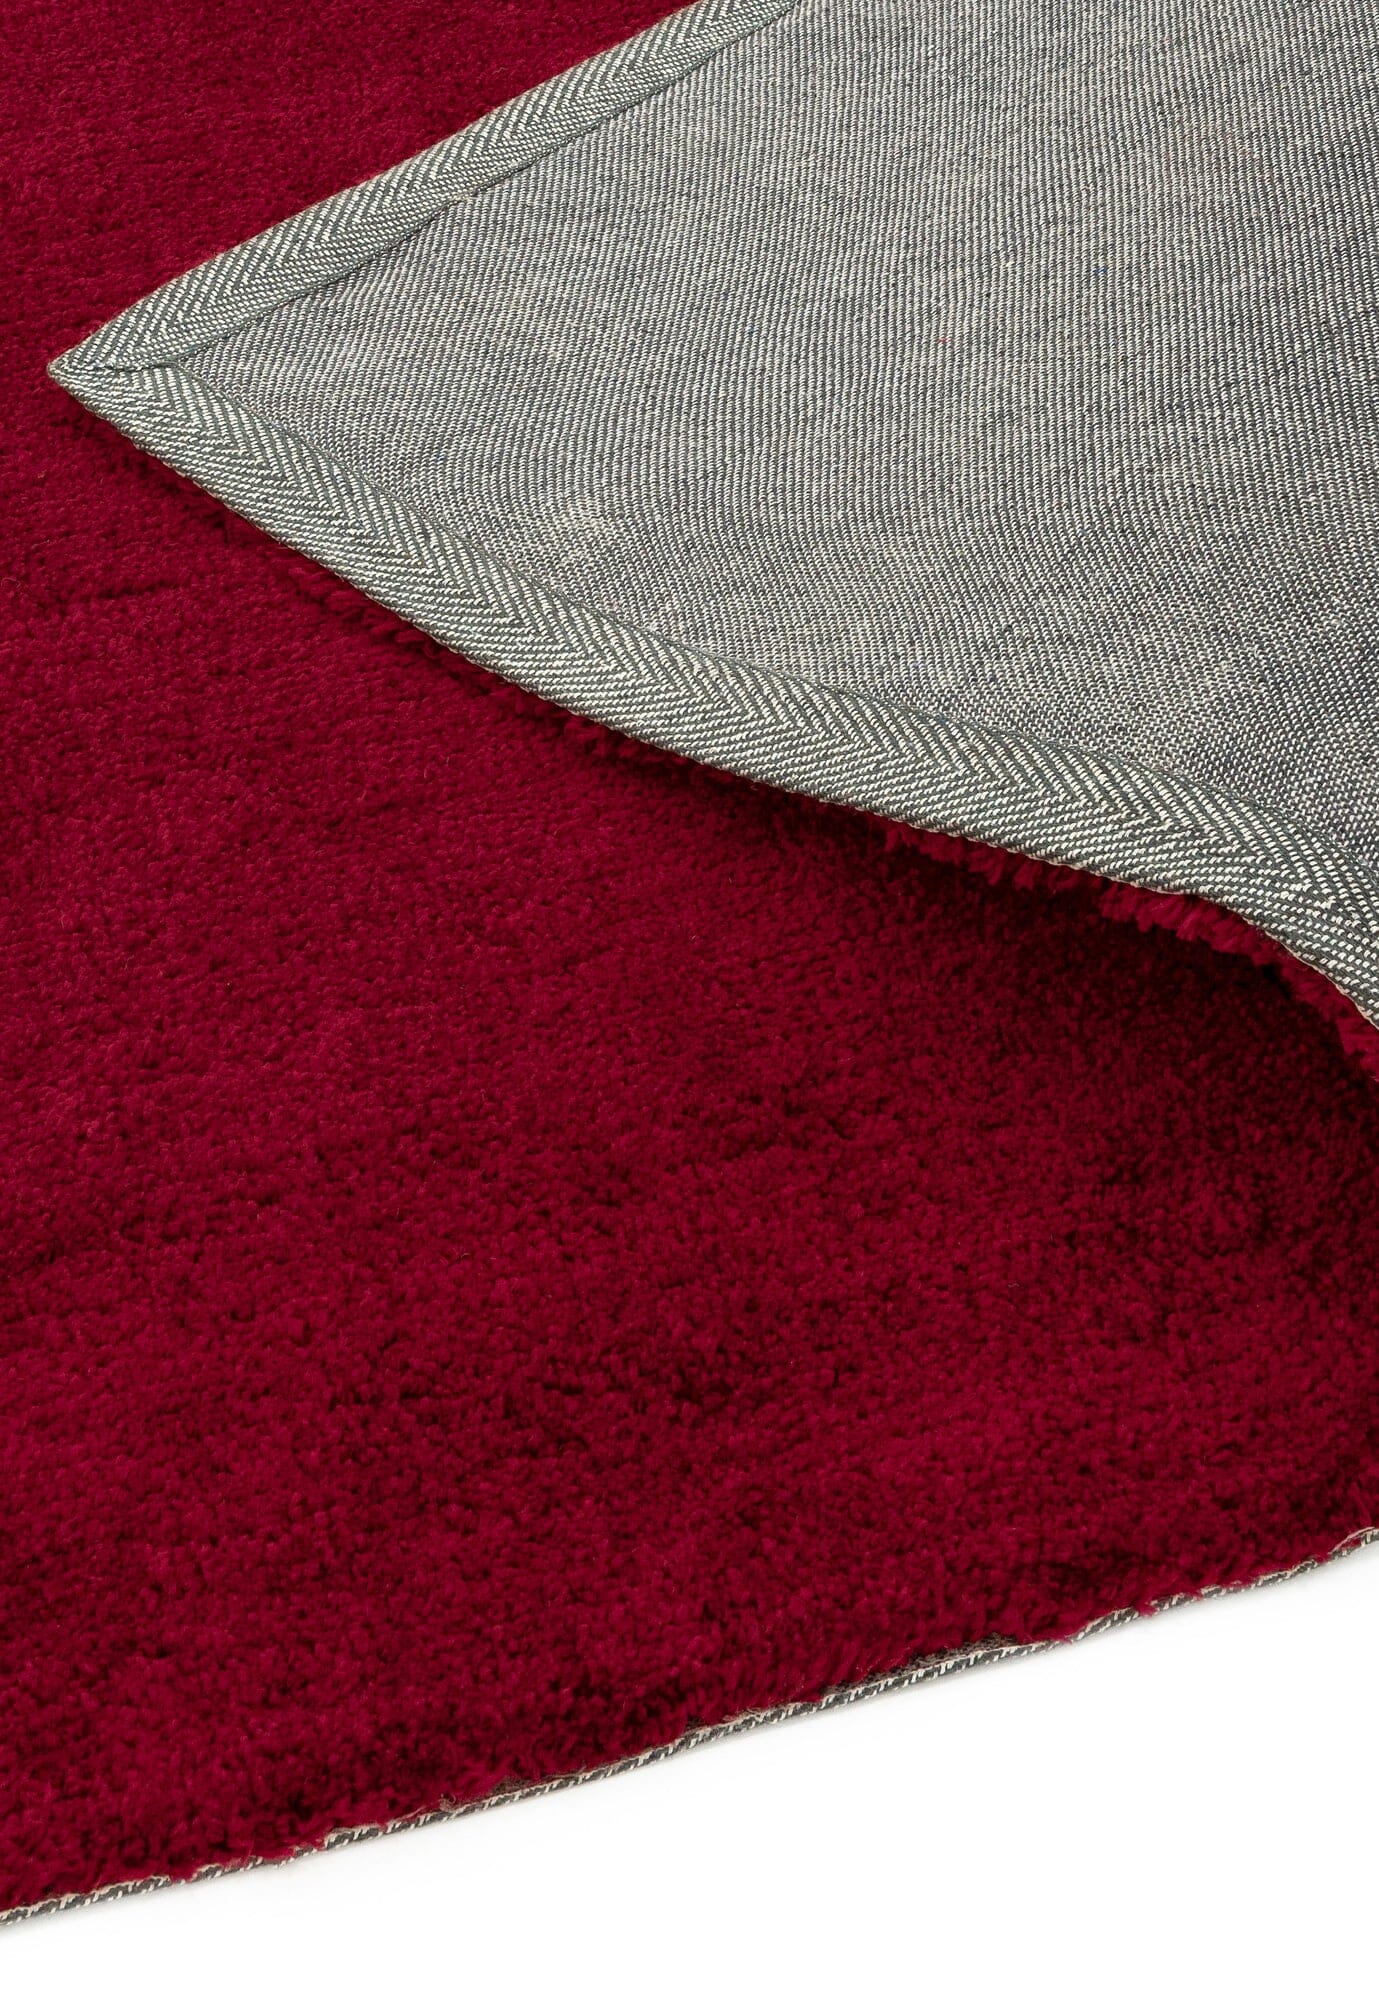  Asiatic Carpets-Asiatic Carpets Milo Table Tufted Rug Berry - 120 x 170cm-Red 597 